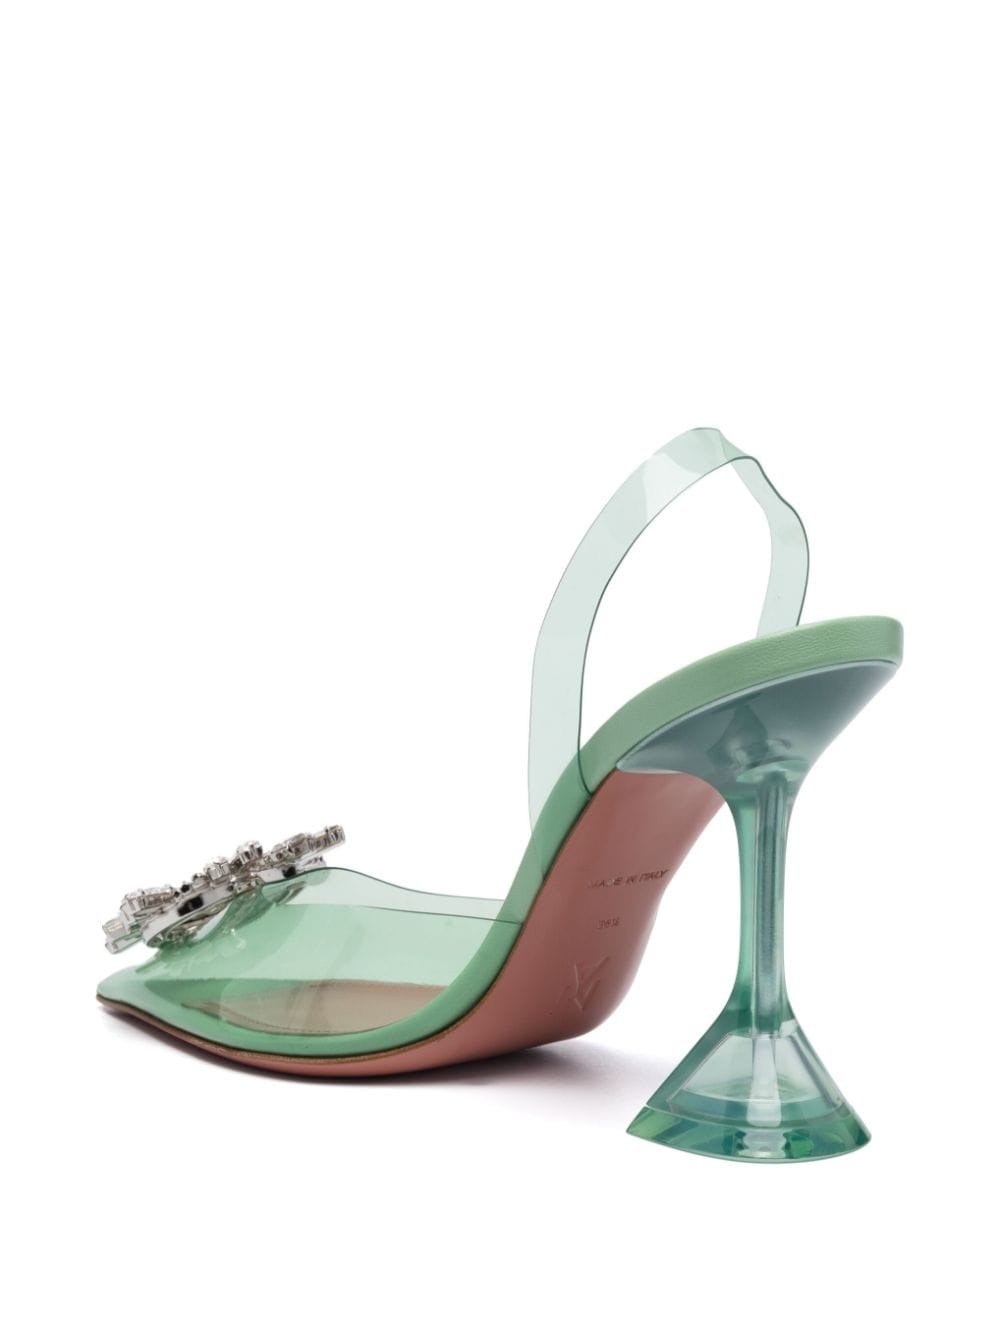 Cape Robbin Miska High Heels for Women, Transparent Strappy Open Toe Shoes  Heels for Women - Nude Size 10 : Buy Online at Best Price in KSA - Souq is  now Amazon.sa: Fashion